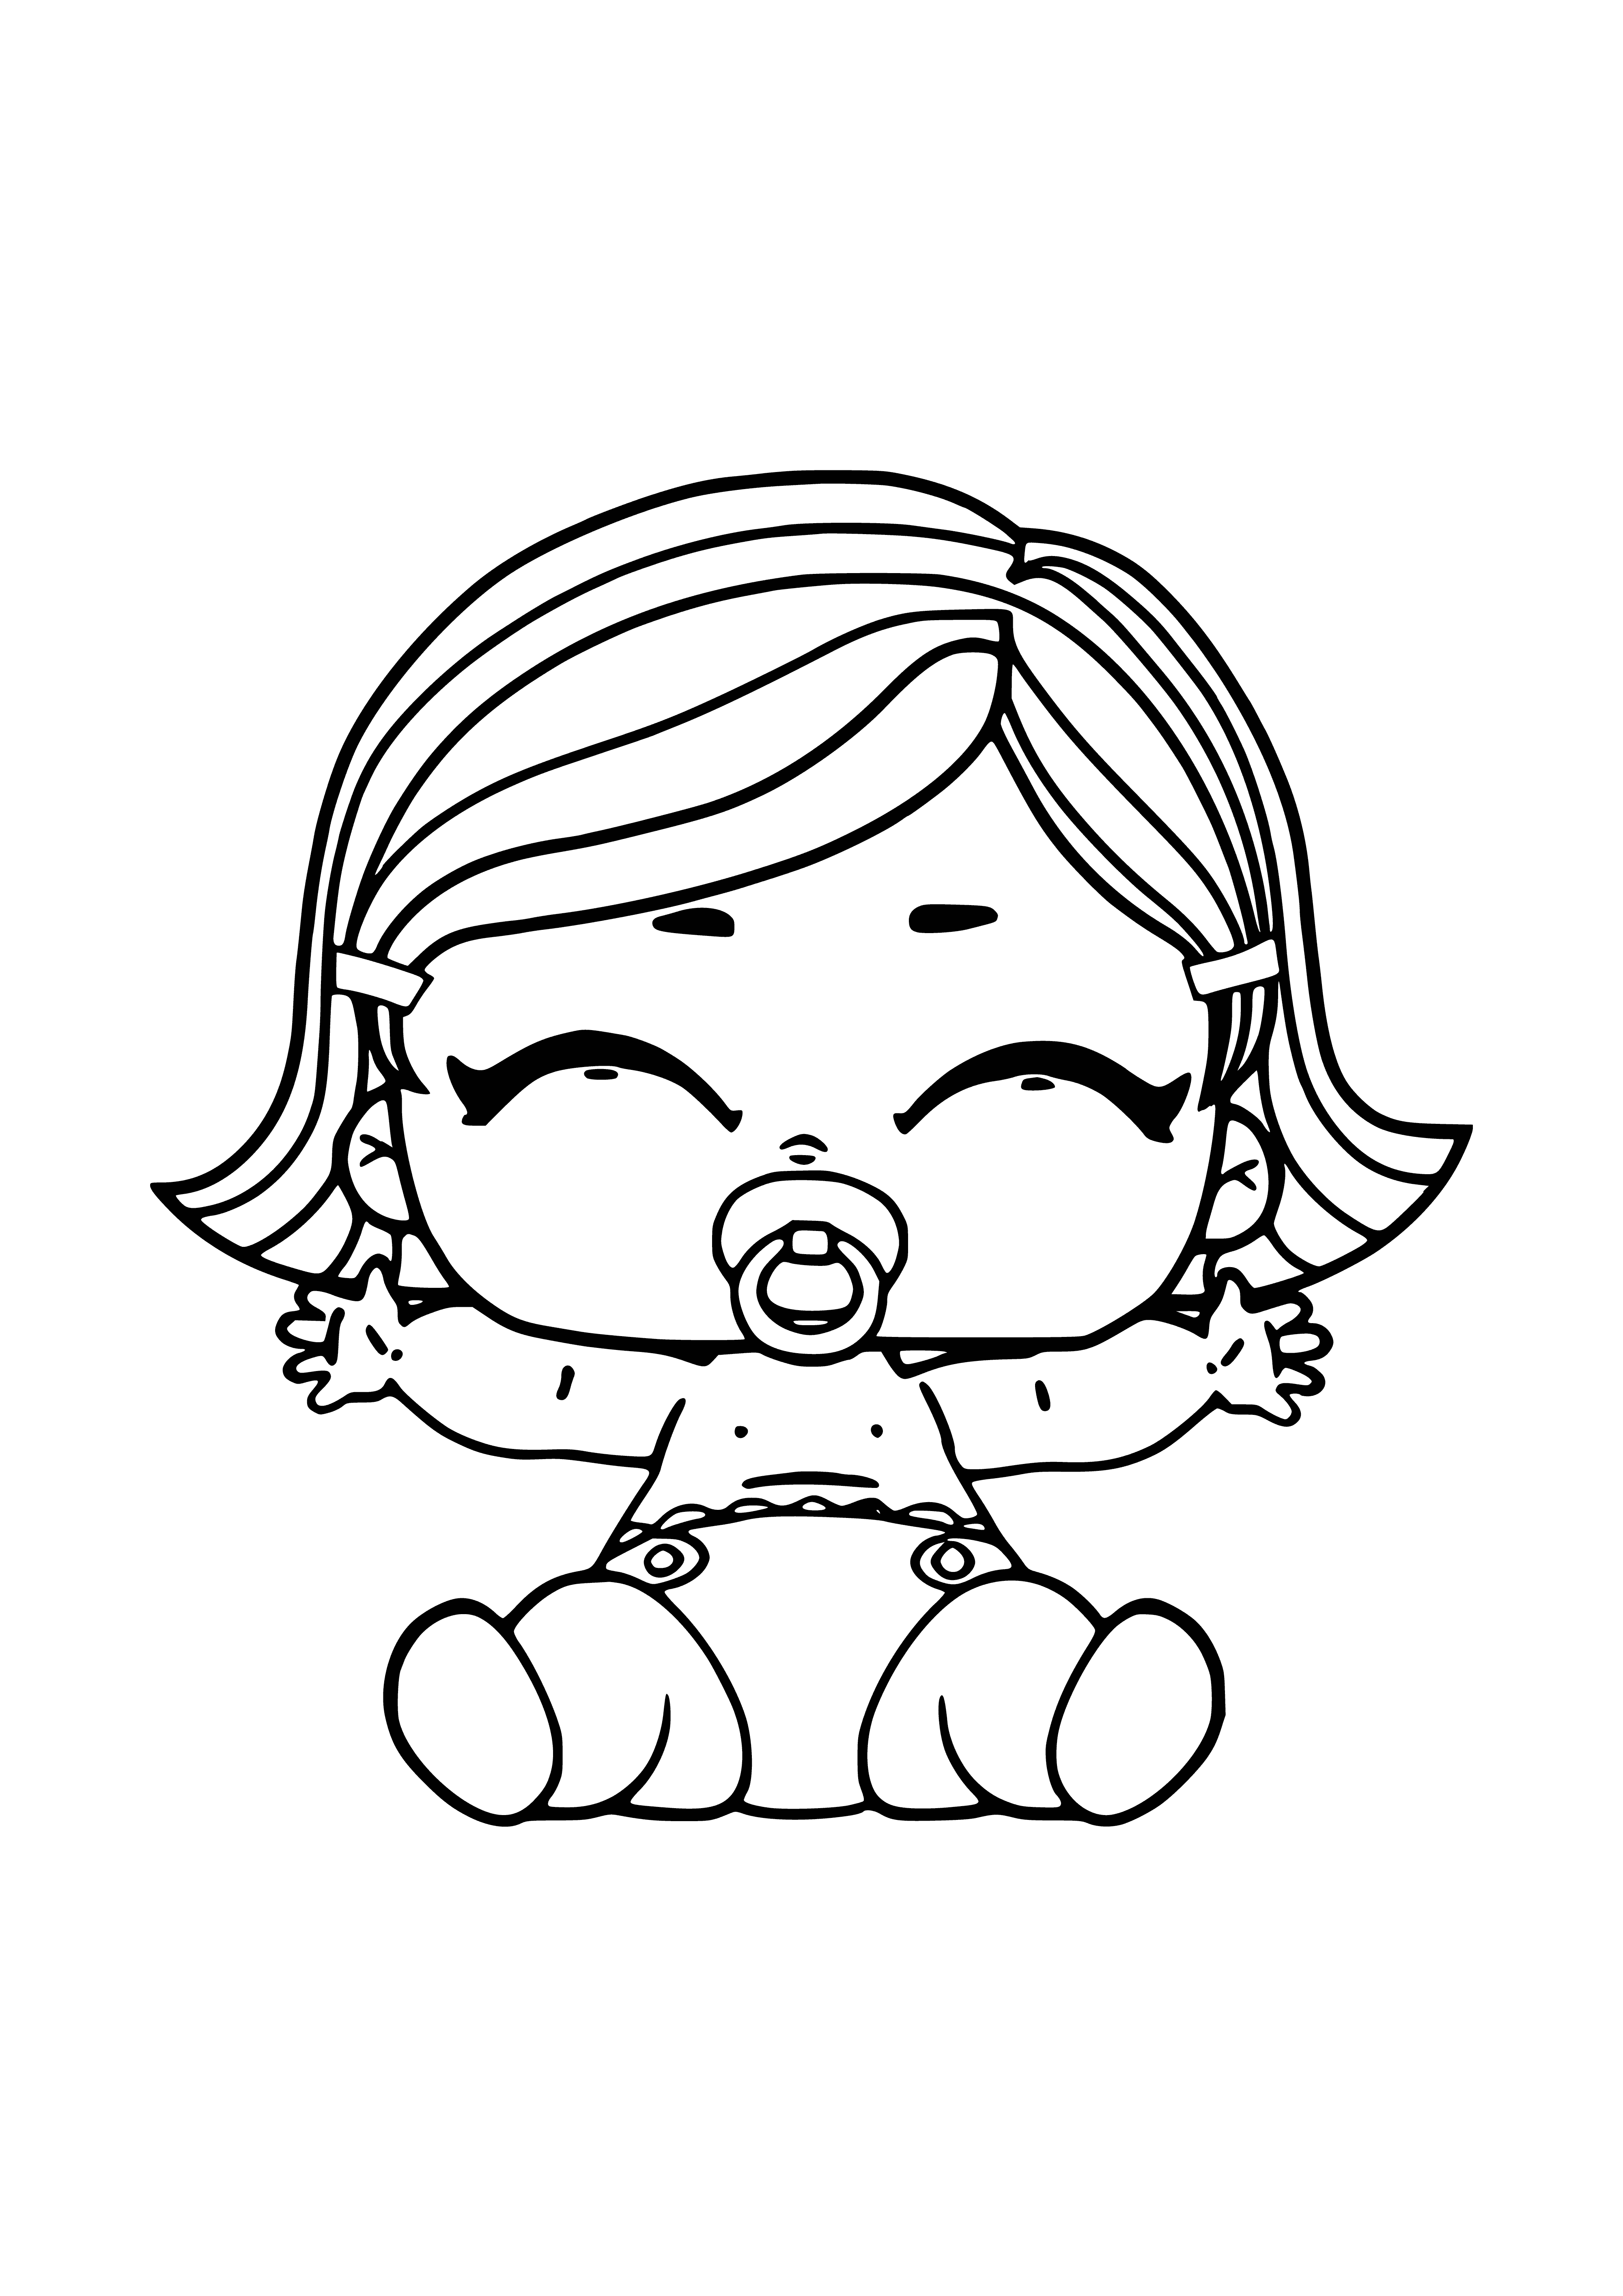 coloring page: Charming LOL lil dreamy doll has blue eyes, long curly hair, and a white dress with blue sash. #LolDreamyDoll